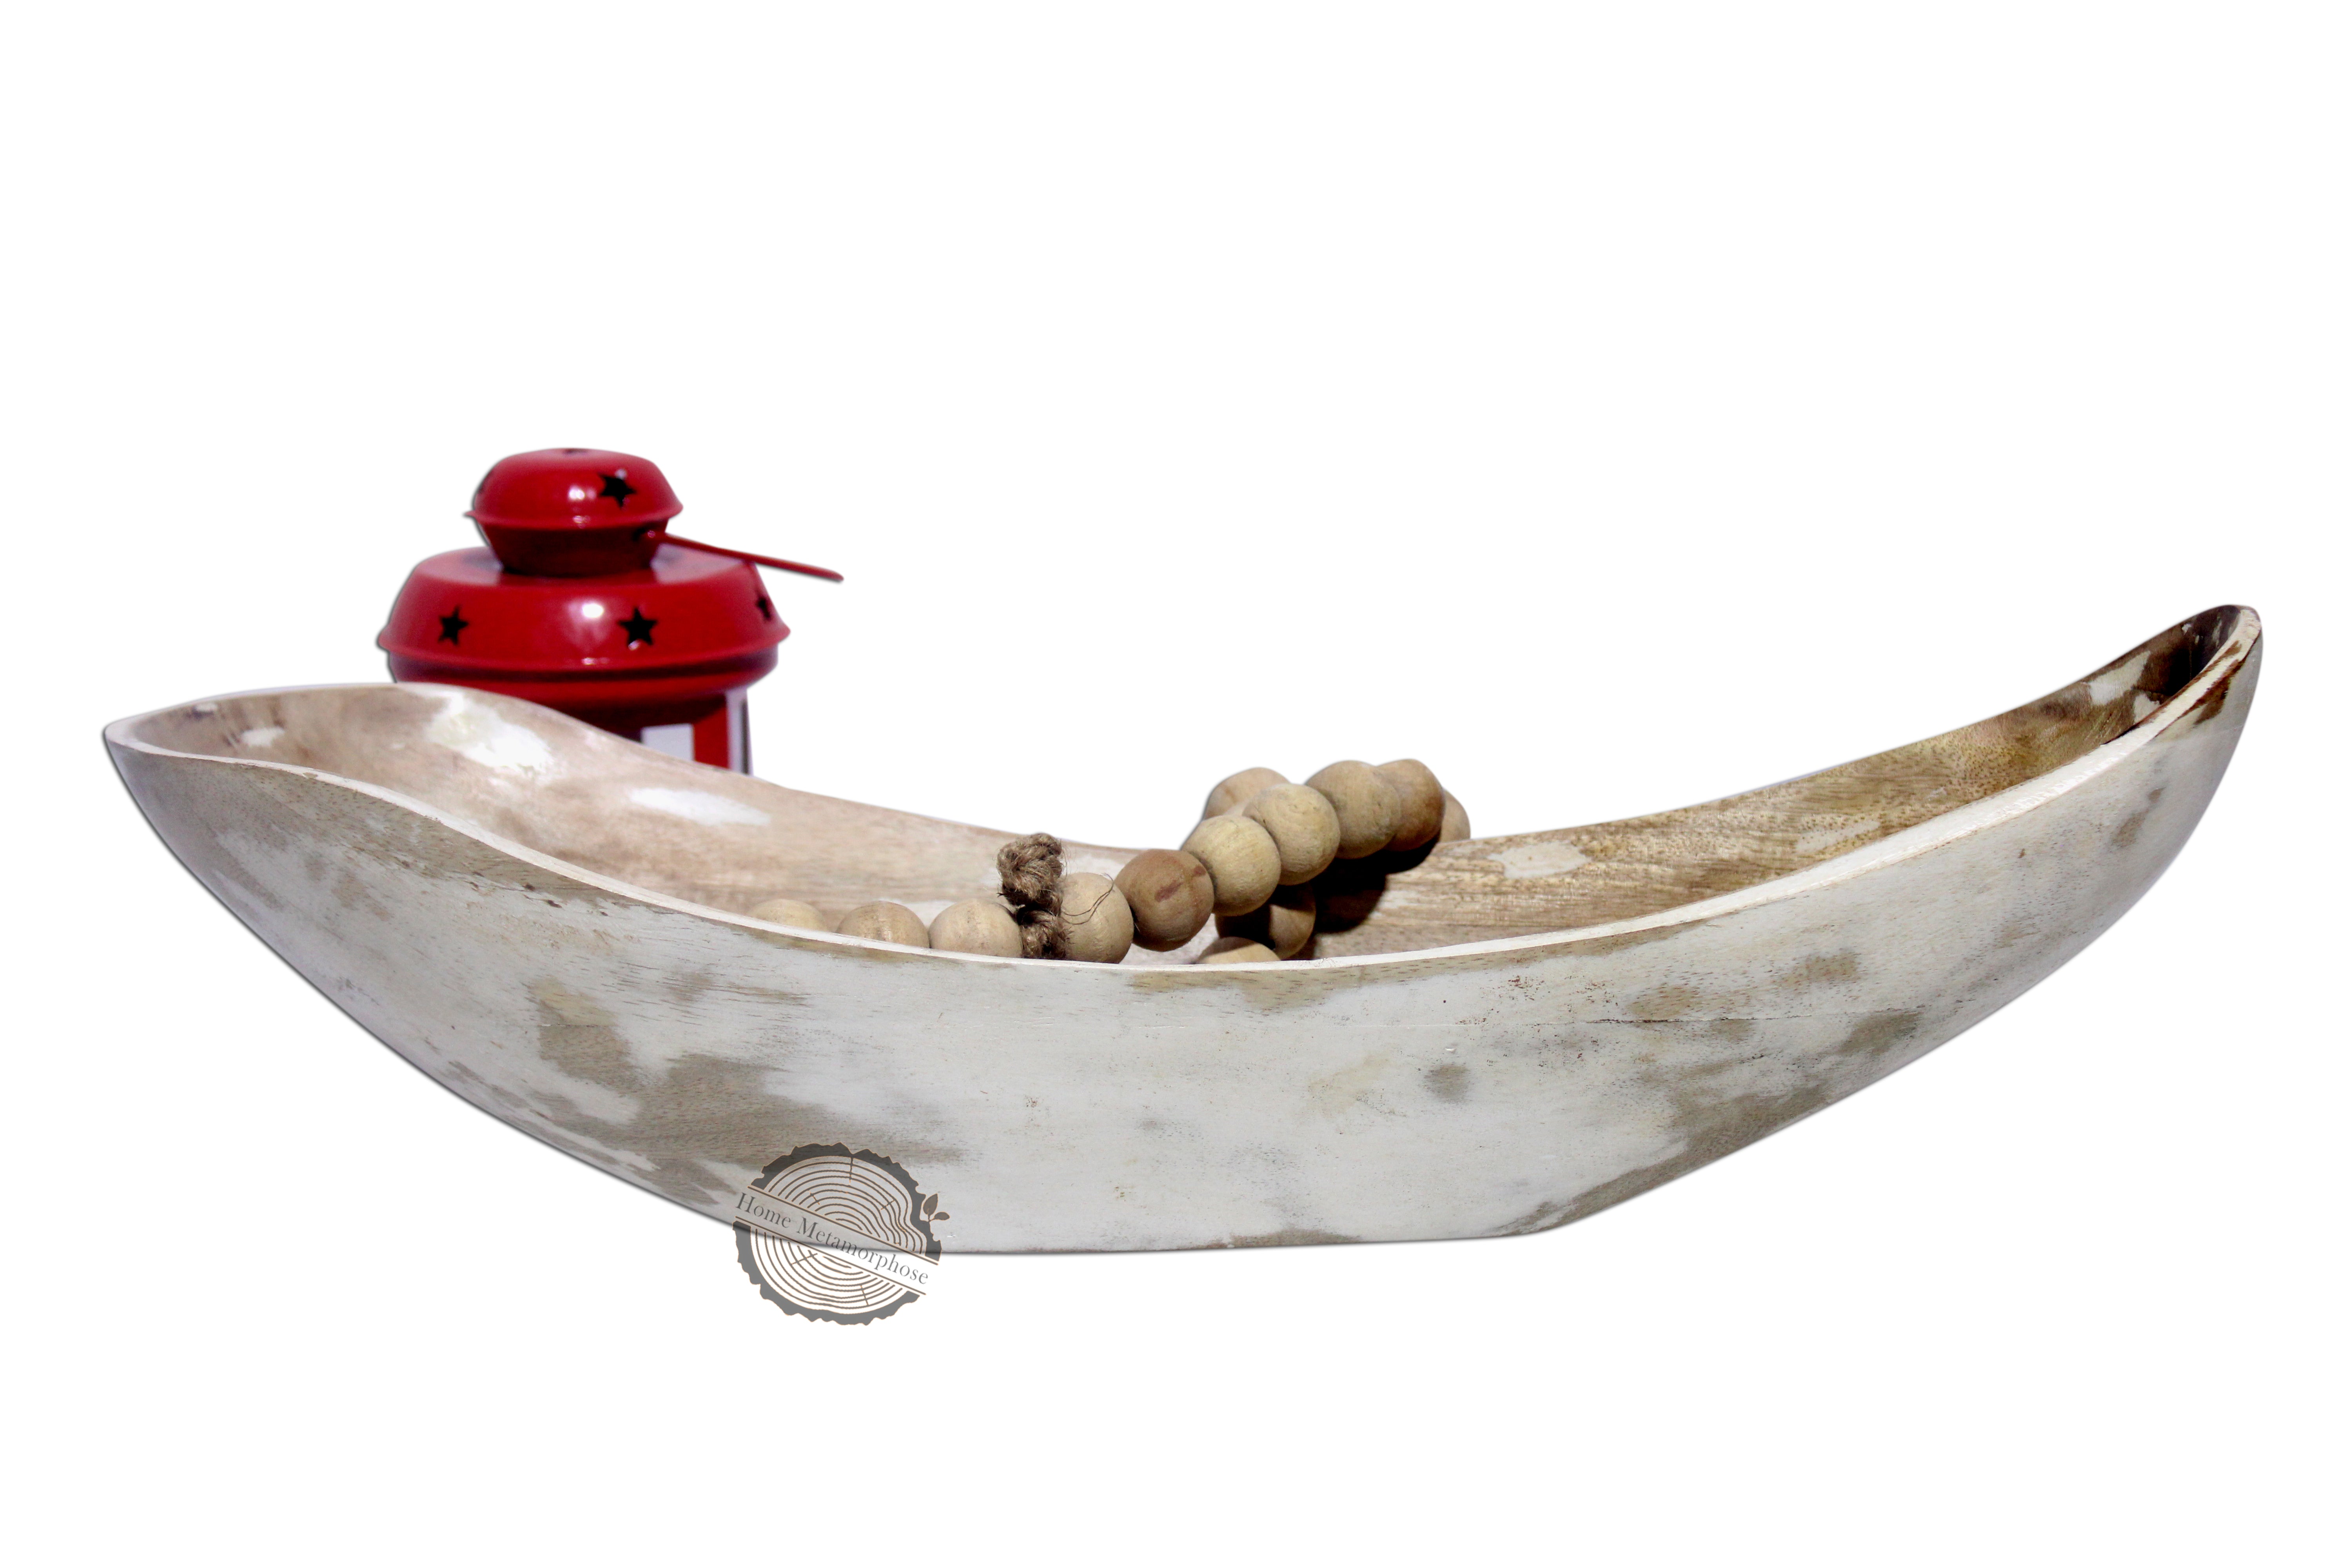 Wooden Dough Bowl Mango Wood Rustic Dough Bowl - Handmade Decorative Bowls For Home Decor, Bathroom, Kitchen Counter, & More - Large Wood Dough Bowl For Decor, Cosmetics, And Keys